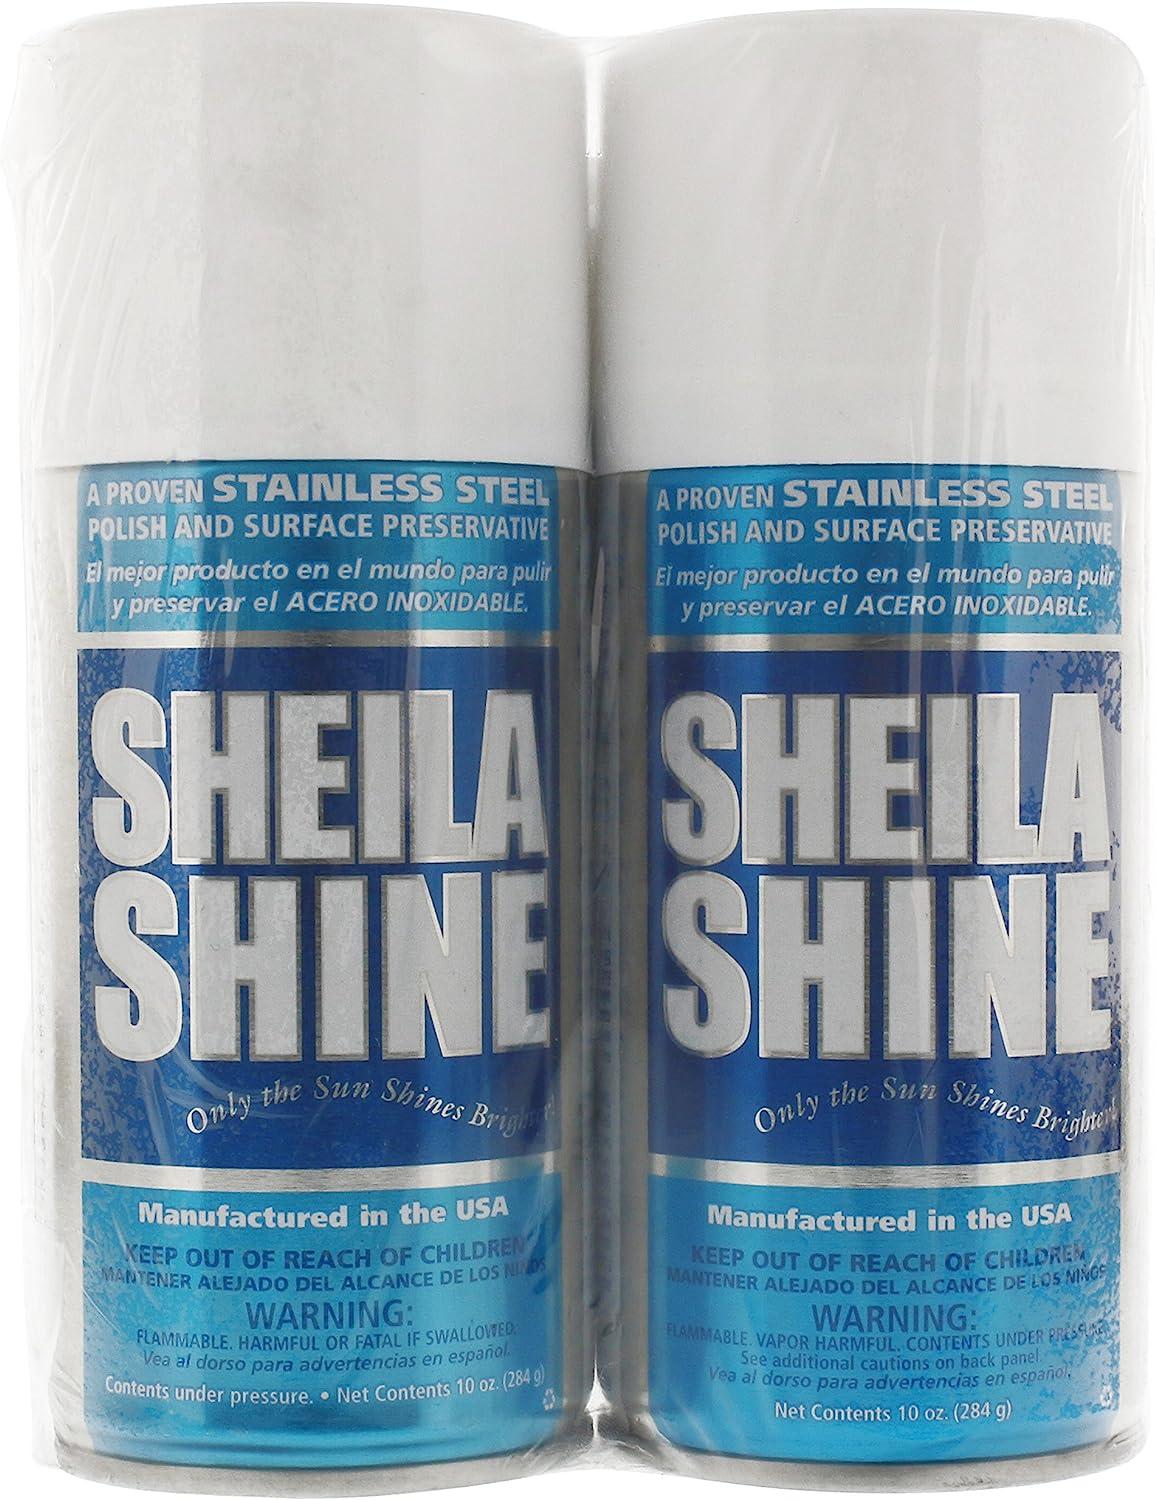 SHEILA SHINE Stainless Steel Cleaner & Polish